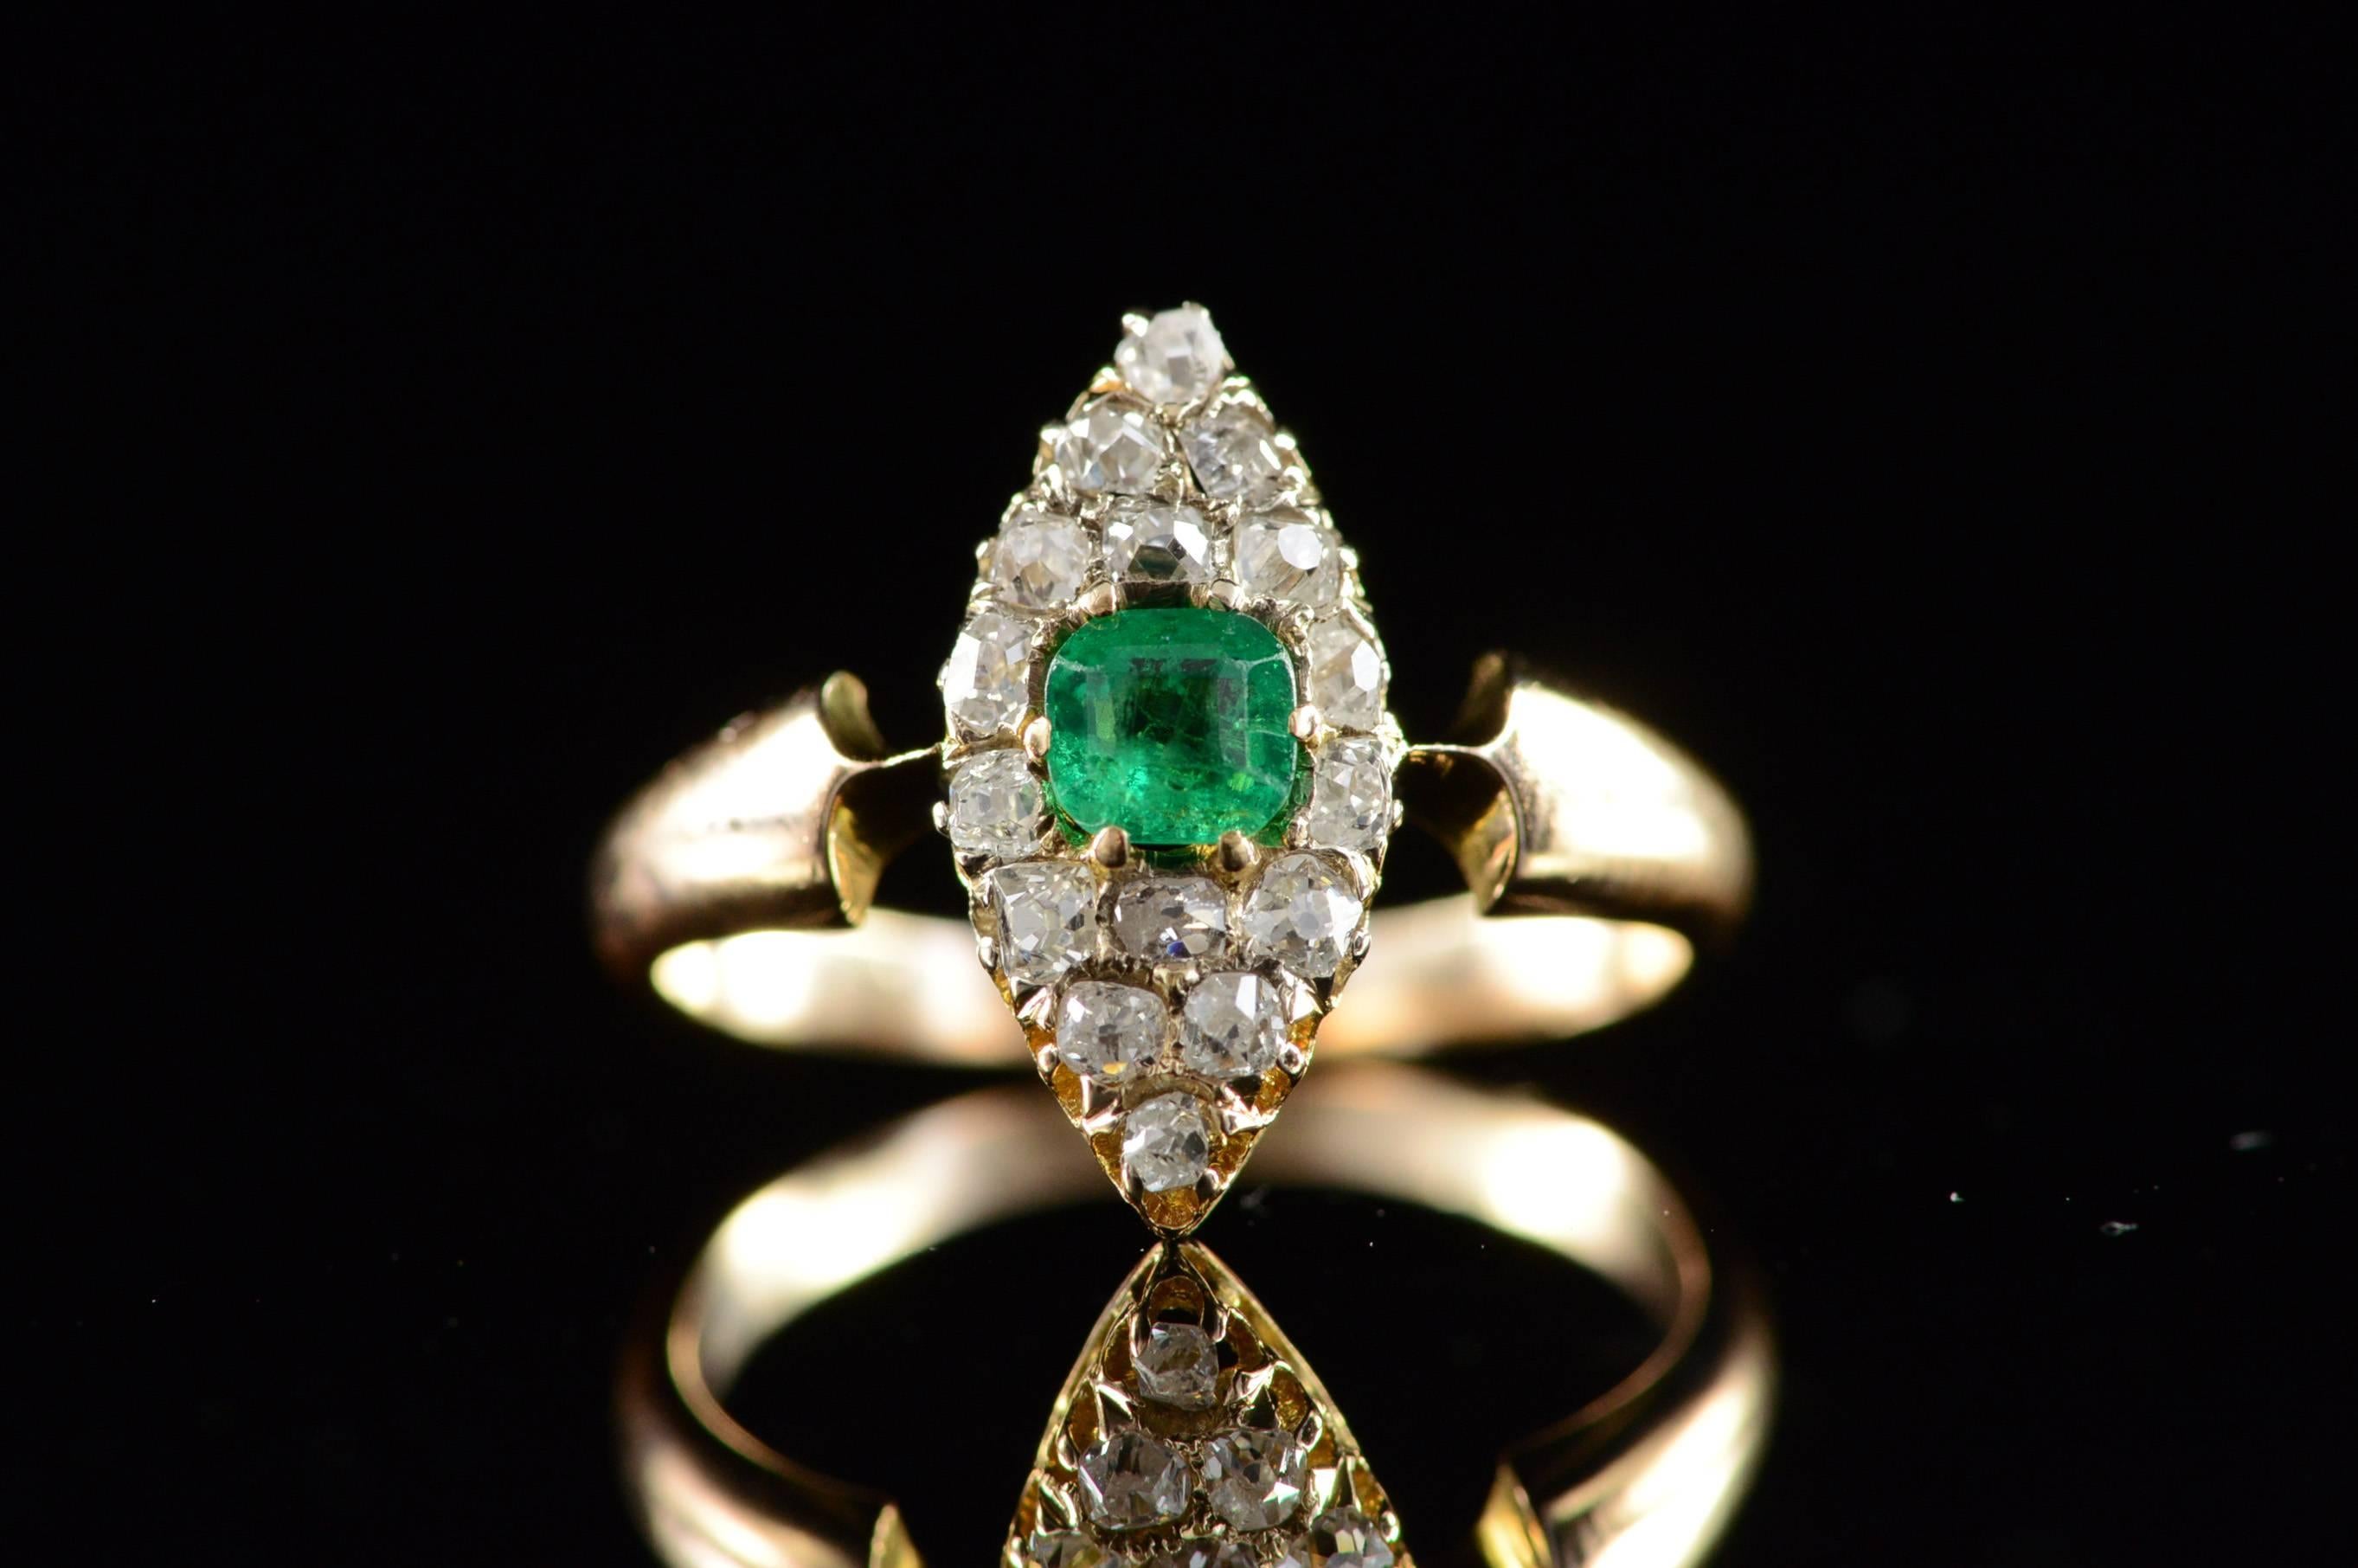 All diamonds are graded according to GIA grading standards.

·Item: 18K 0.50 CTW Emerald Diamond Old Mine Cut Vintage Ring Size 5 Yellow Gold

·Composition: 18k Gold Acid Tested

·Gem Stone: 0.25ct Emerald, 16x Mine Cut Diamonds=0.50ctw